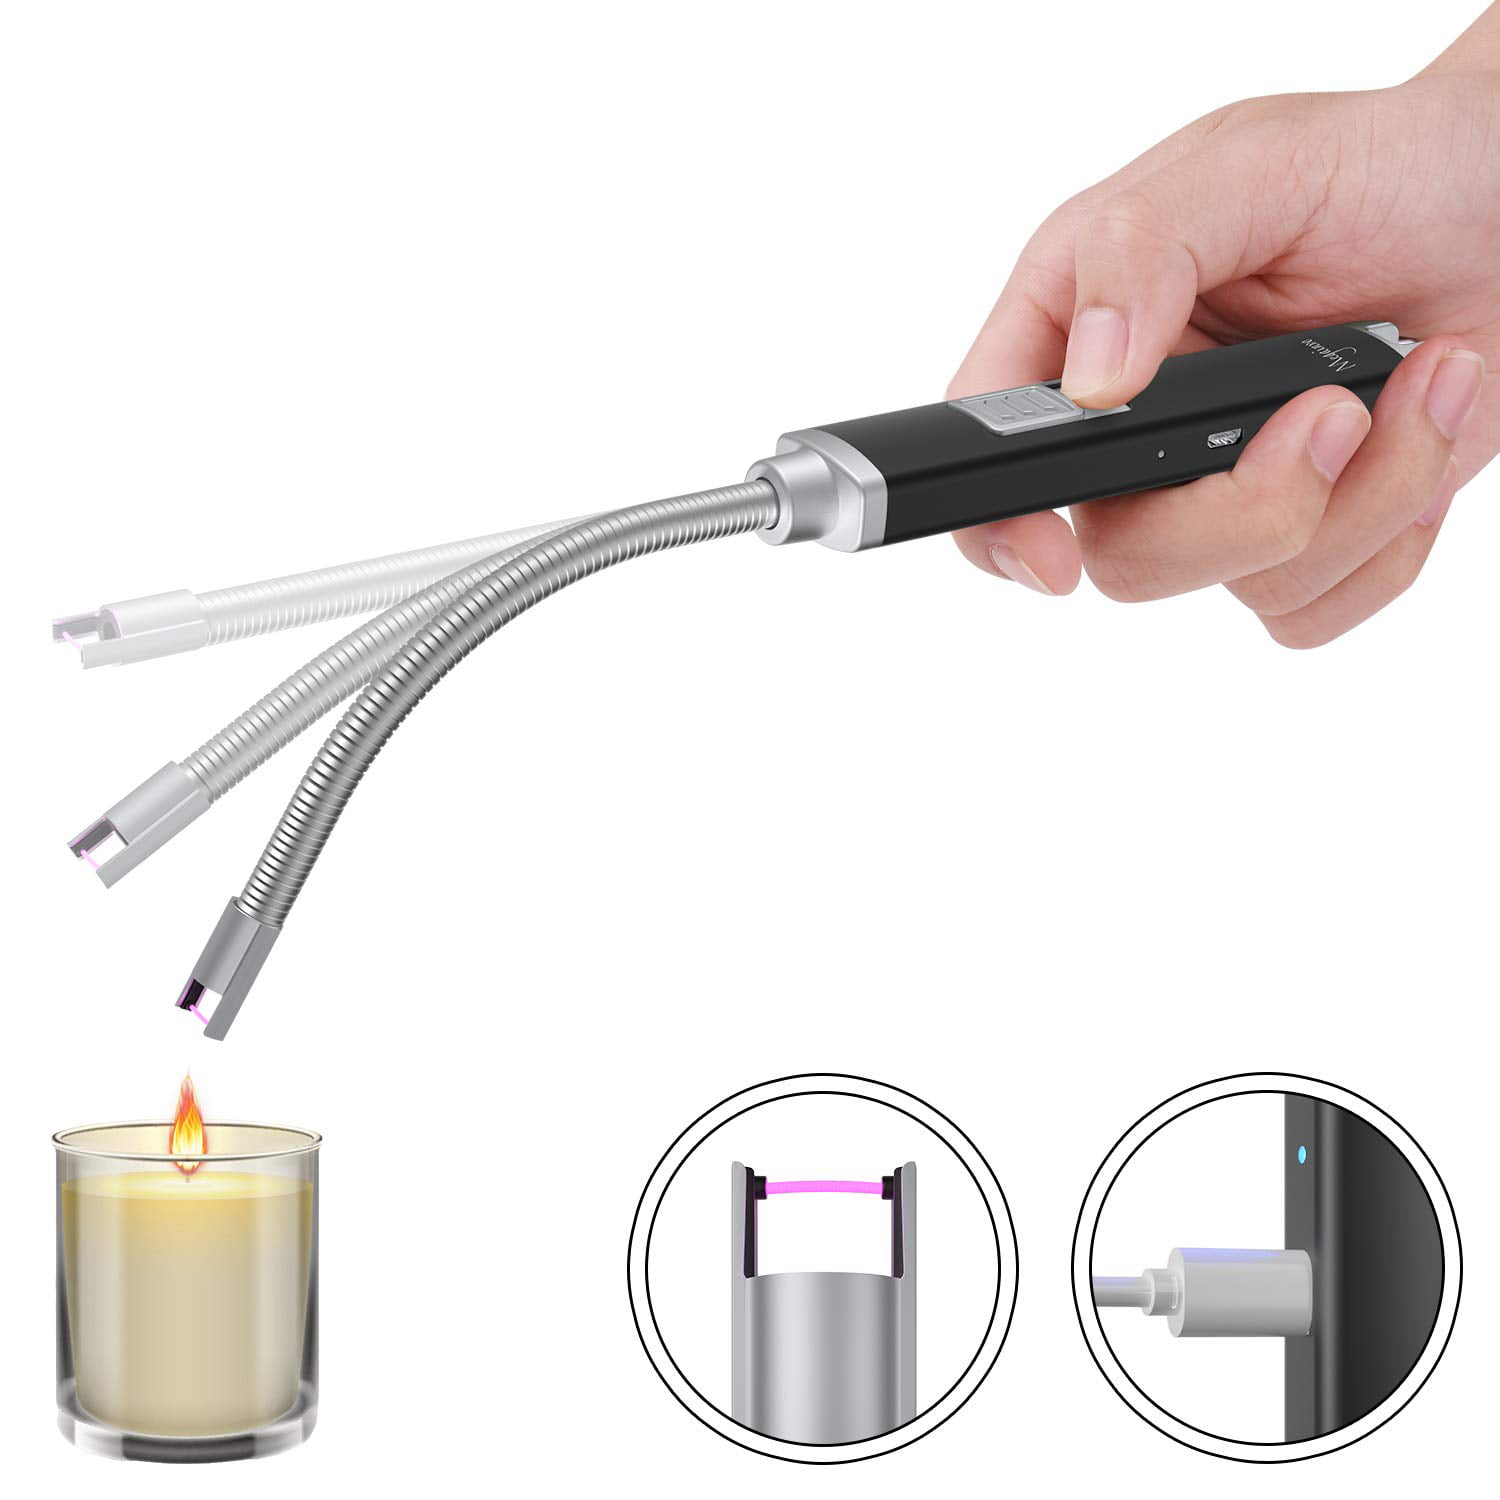 VICHYIE Electric Lighter Long with Multi-Protect Safety Systems & Flexible Neck & LED Battery Display Rechargeable Lighter for Scented Candle Camping Cooking BBQs Fireworks Black Candle Lighter